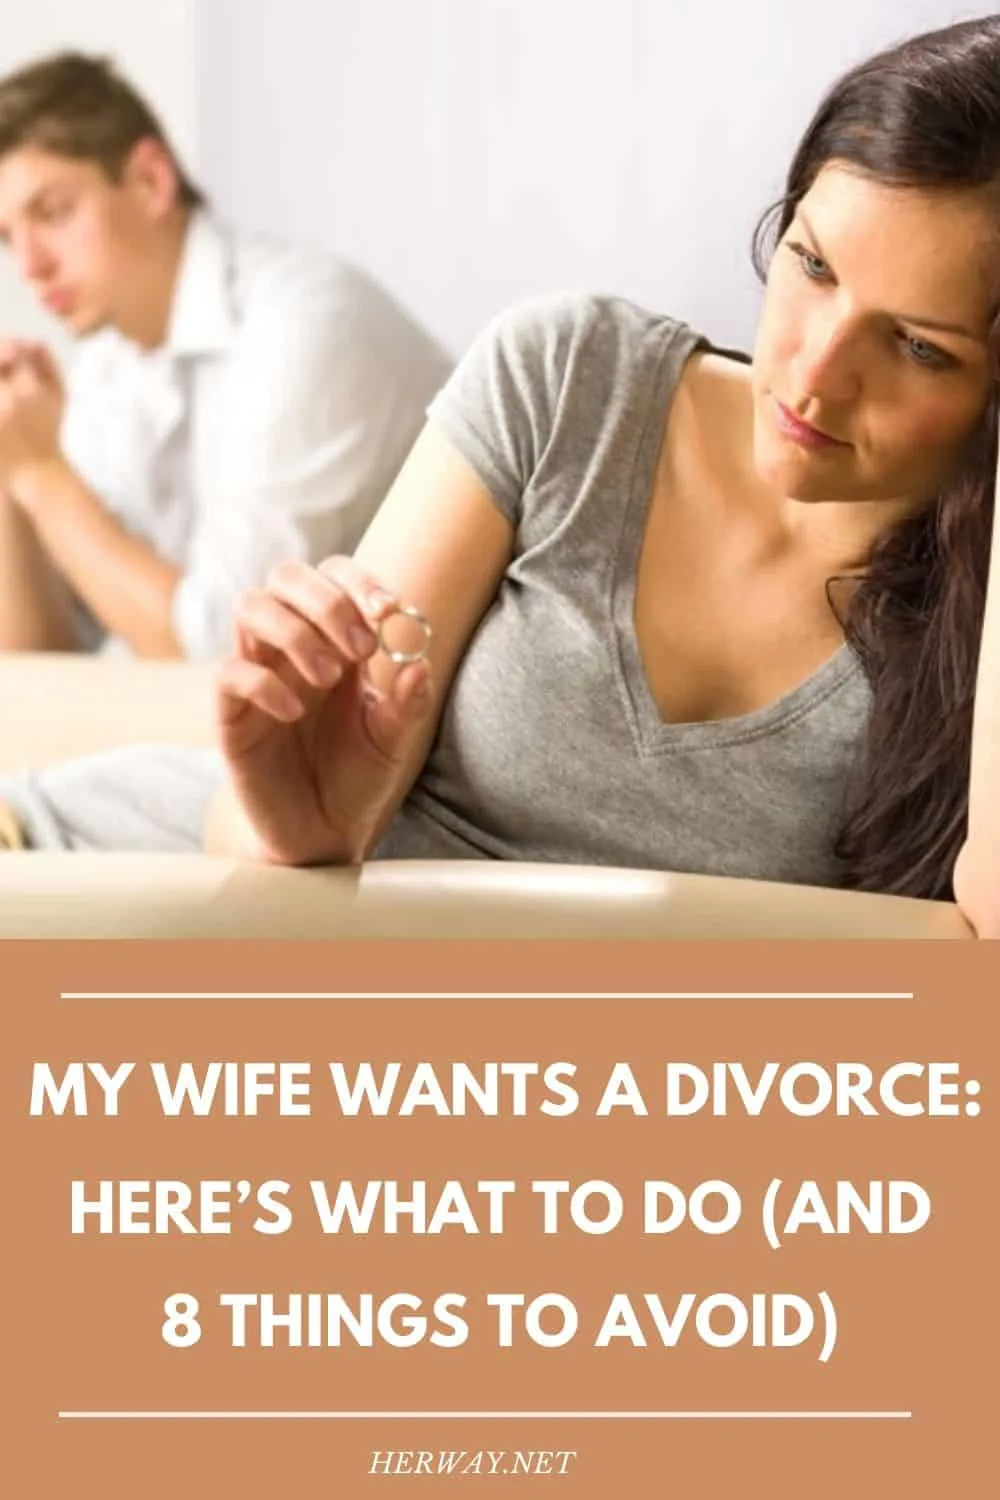 My Wife Wants A Divorce: Here’s What To Do (And 8 Things To Avoid)